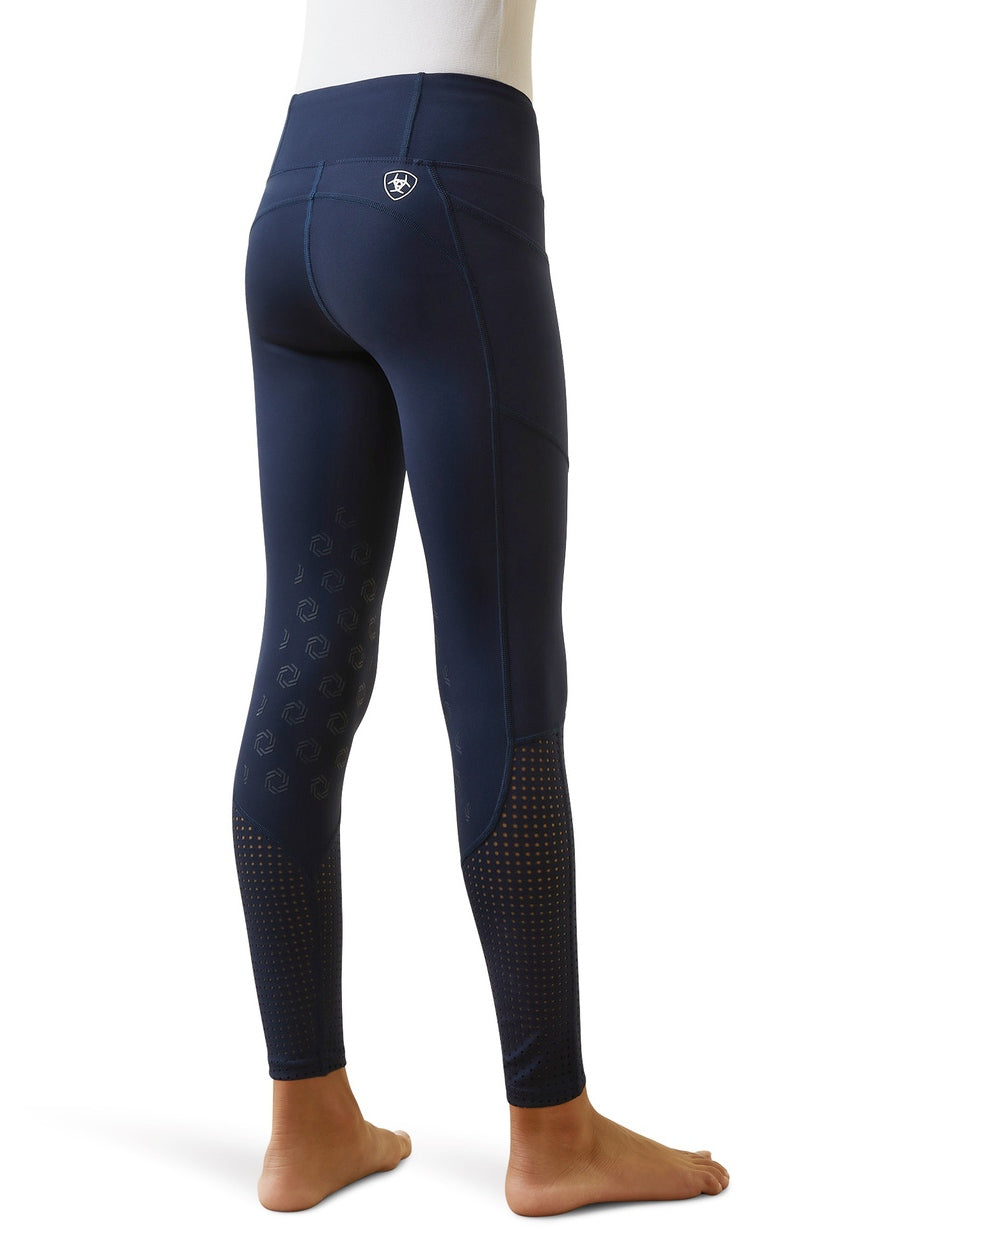 Ariat Childrens Eos Knee Patch Tights in Navy